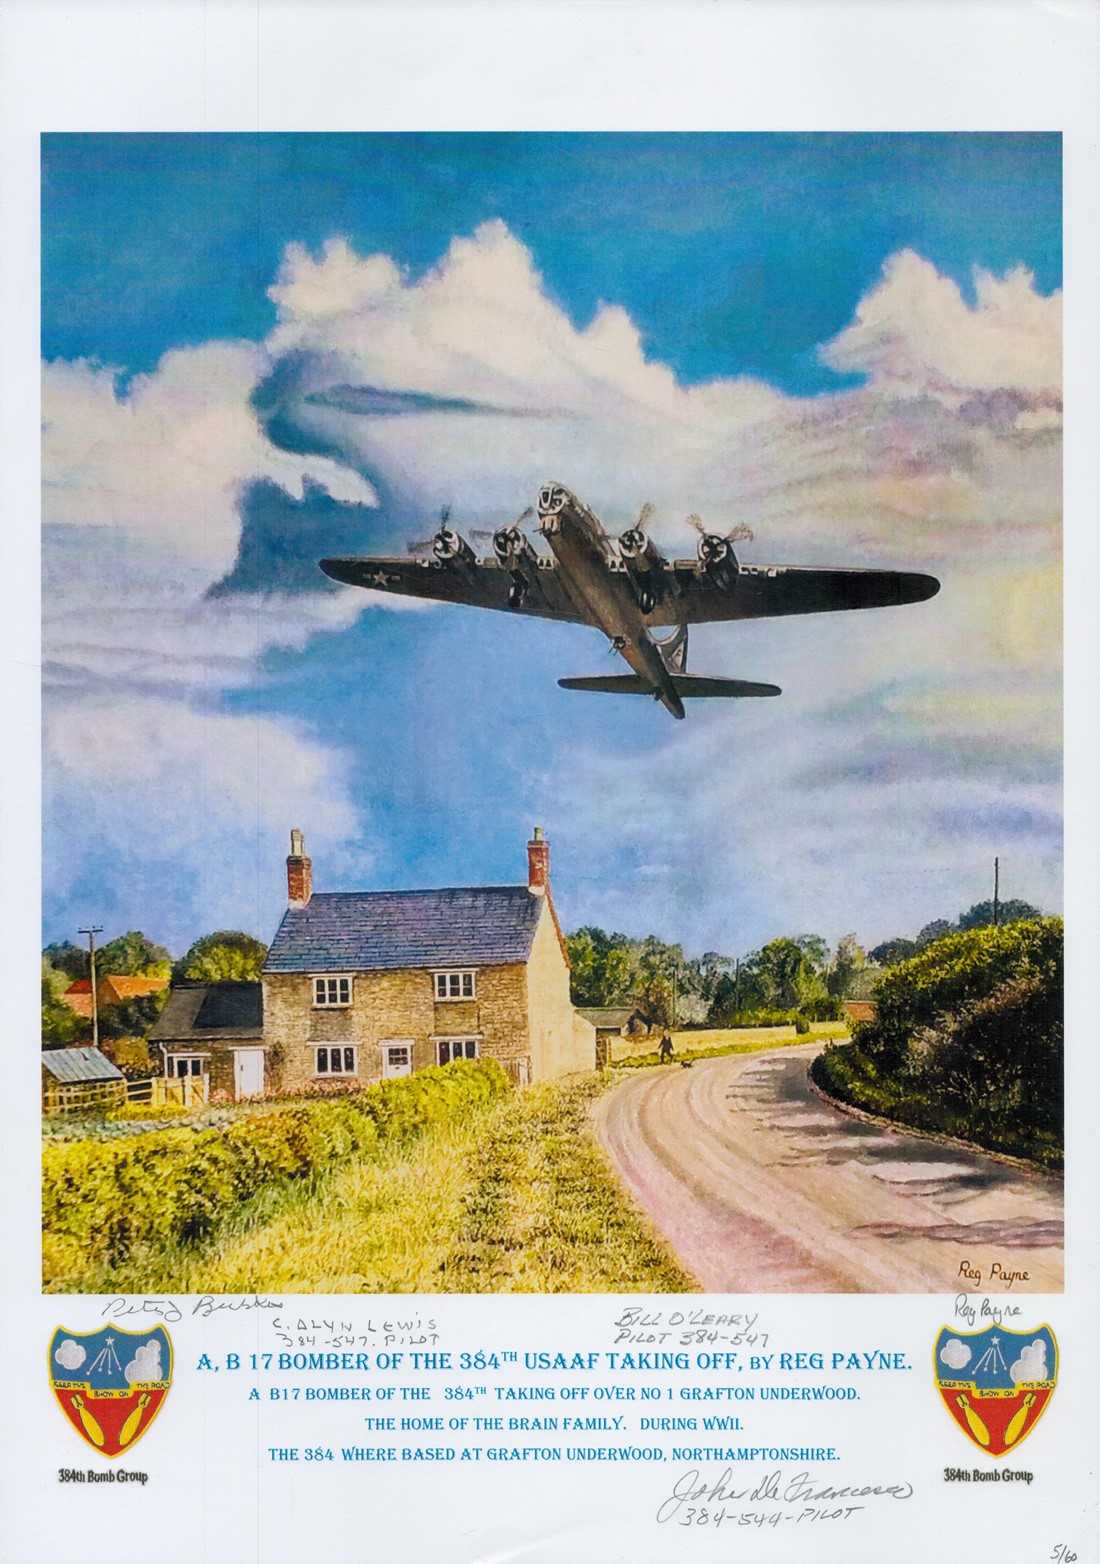 B 17 Bomber of the 384th USAAF taking off by Reg Payne. Signed by 2nd Ltntc O'leary, Staff Sgt